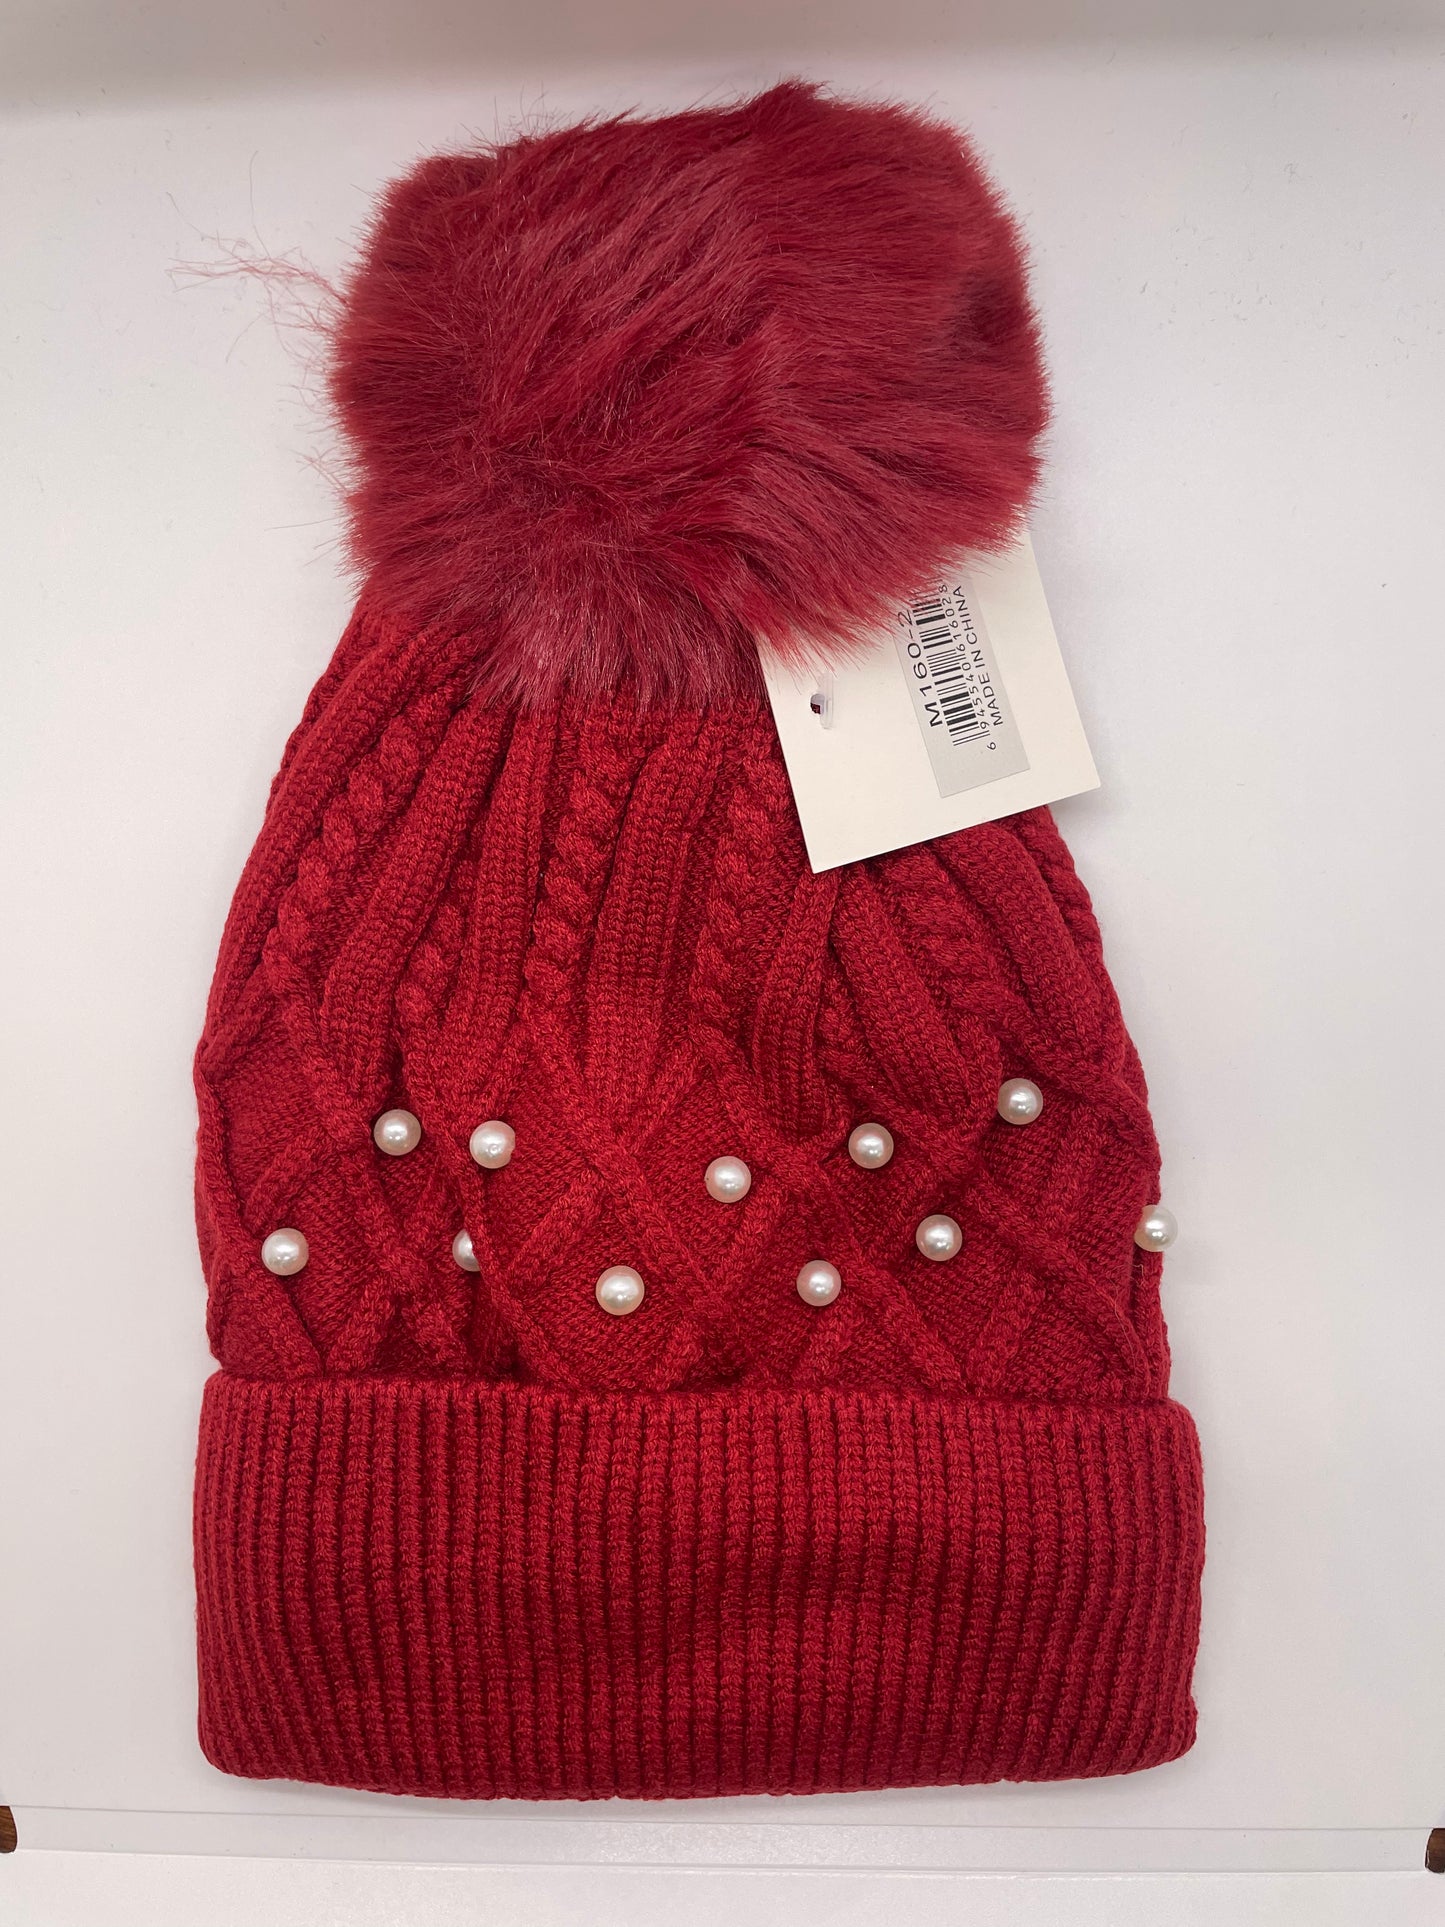 Red women's toboggan hat with a knit texture and a durable